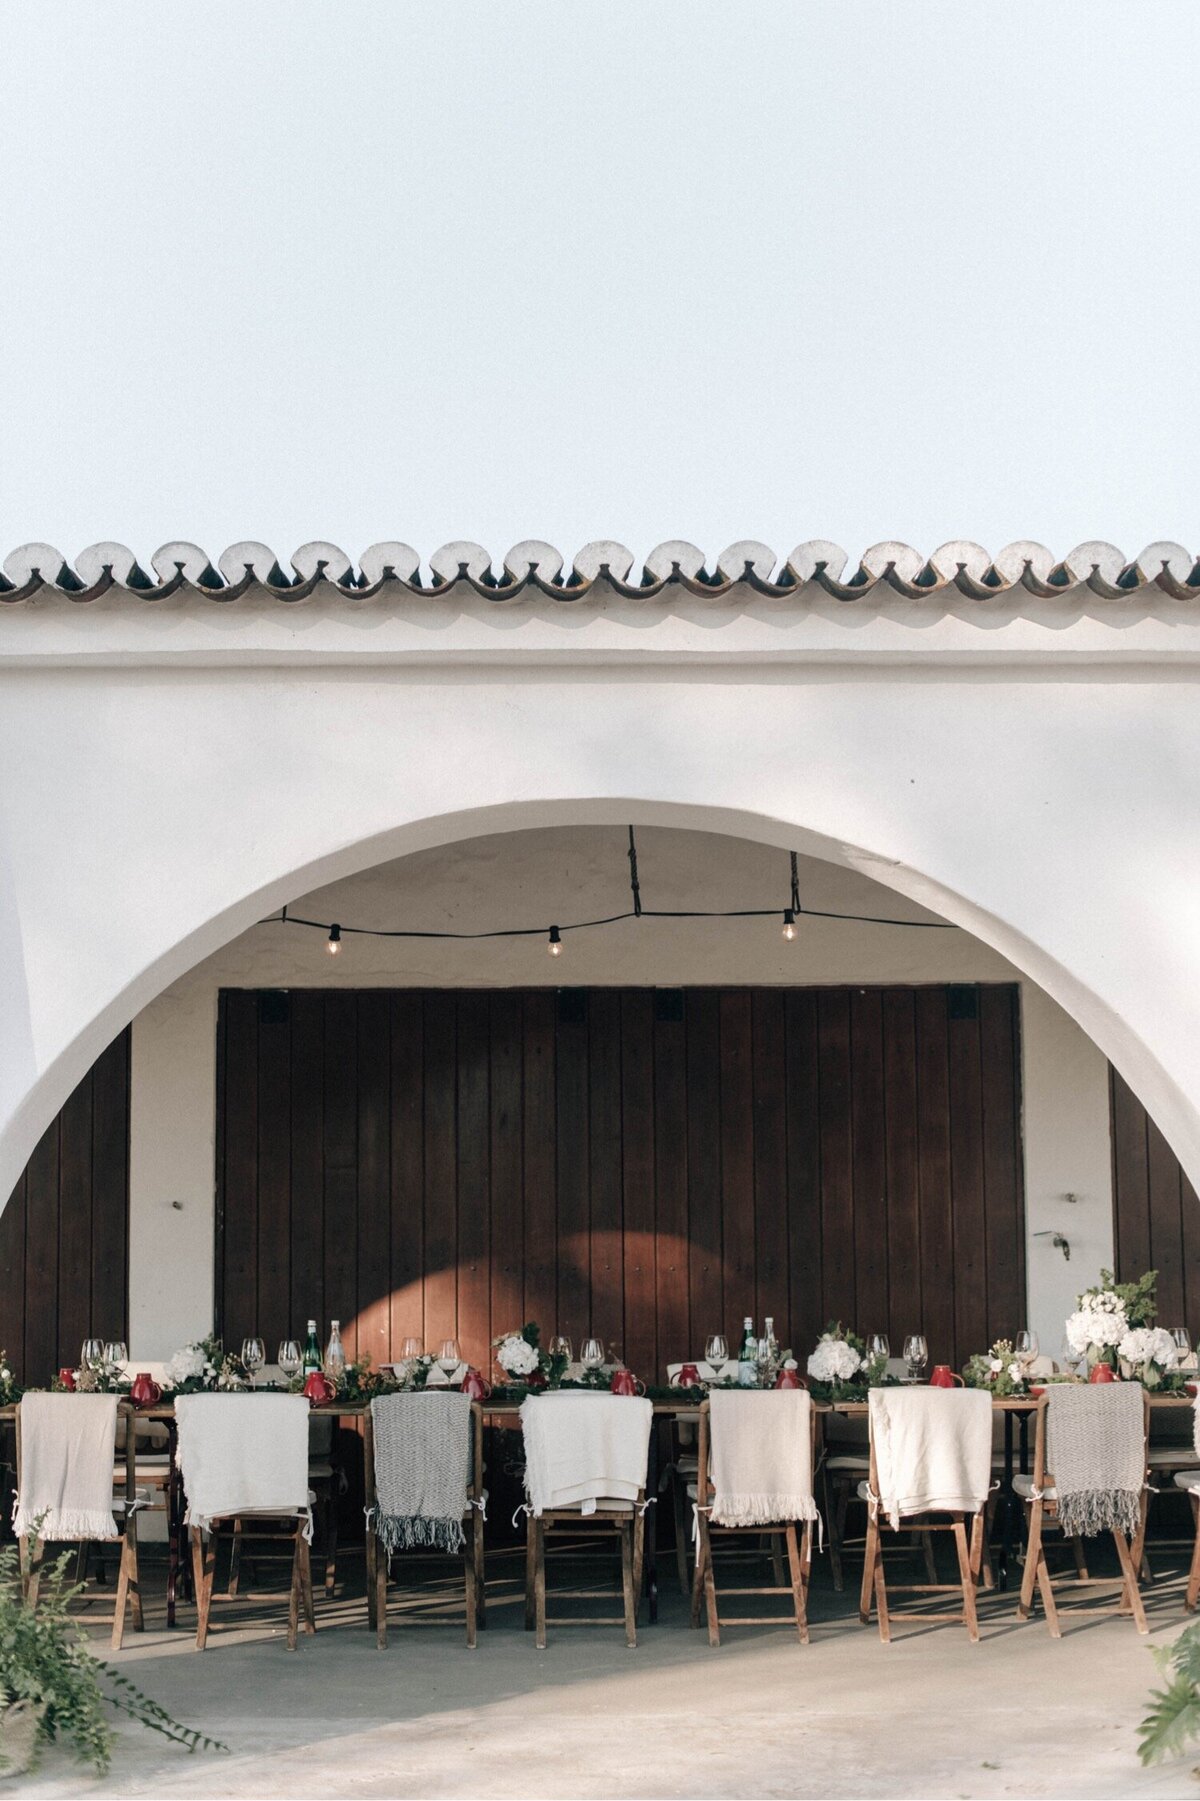 05_Flora_And_Grace_Portugal_Editorial_Wedding_Photographer Lisboa_Wedding_Photographer-127_A modern luxury wedding at Malhadina Nova in Portugal in the Alentejo region. Understated elegance and sleek aesthetic captured by Flora and Grace Photography.